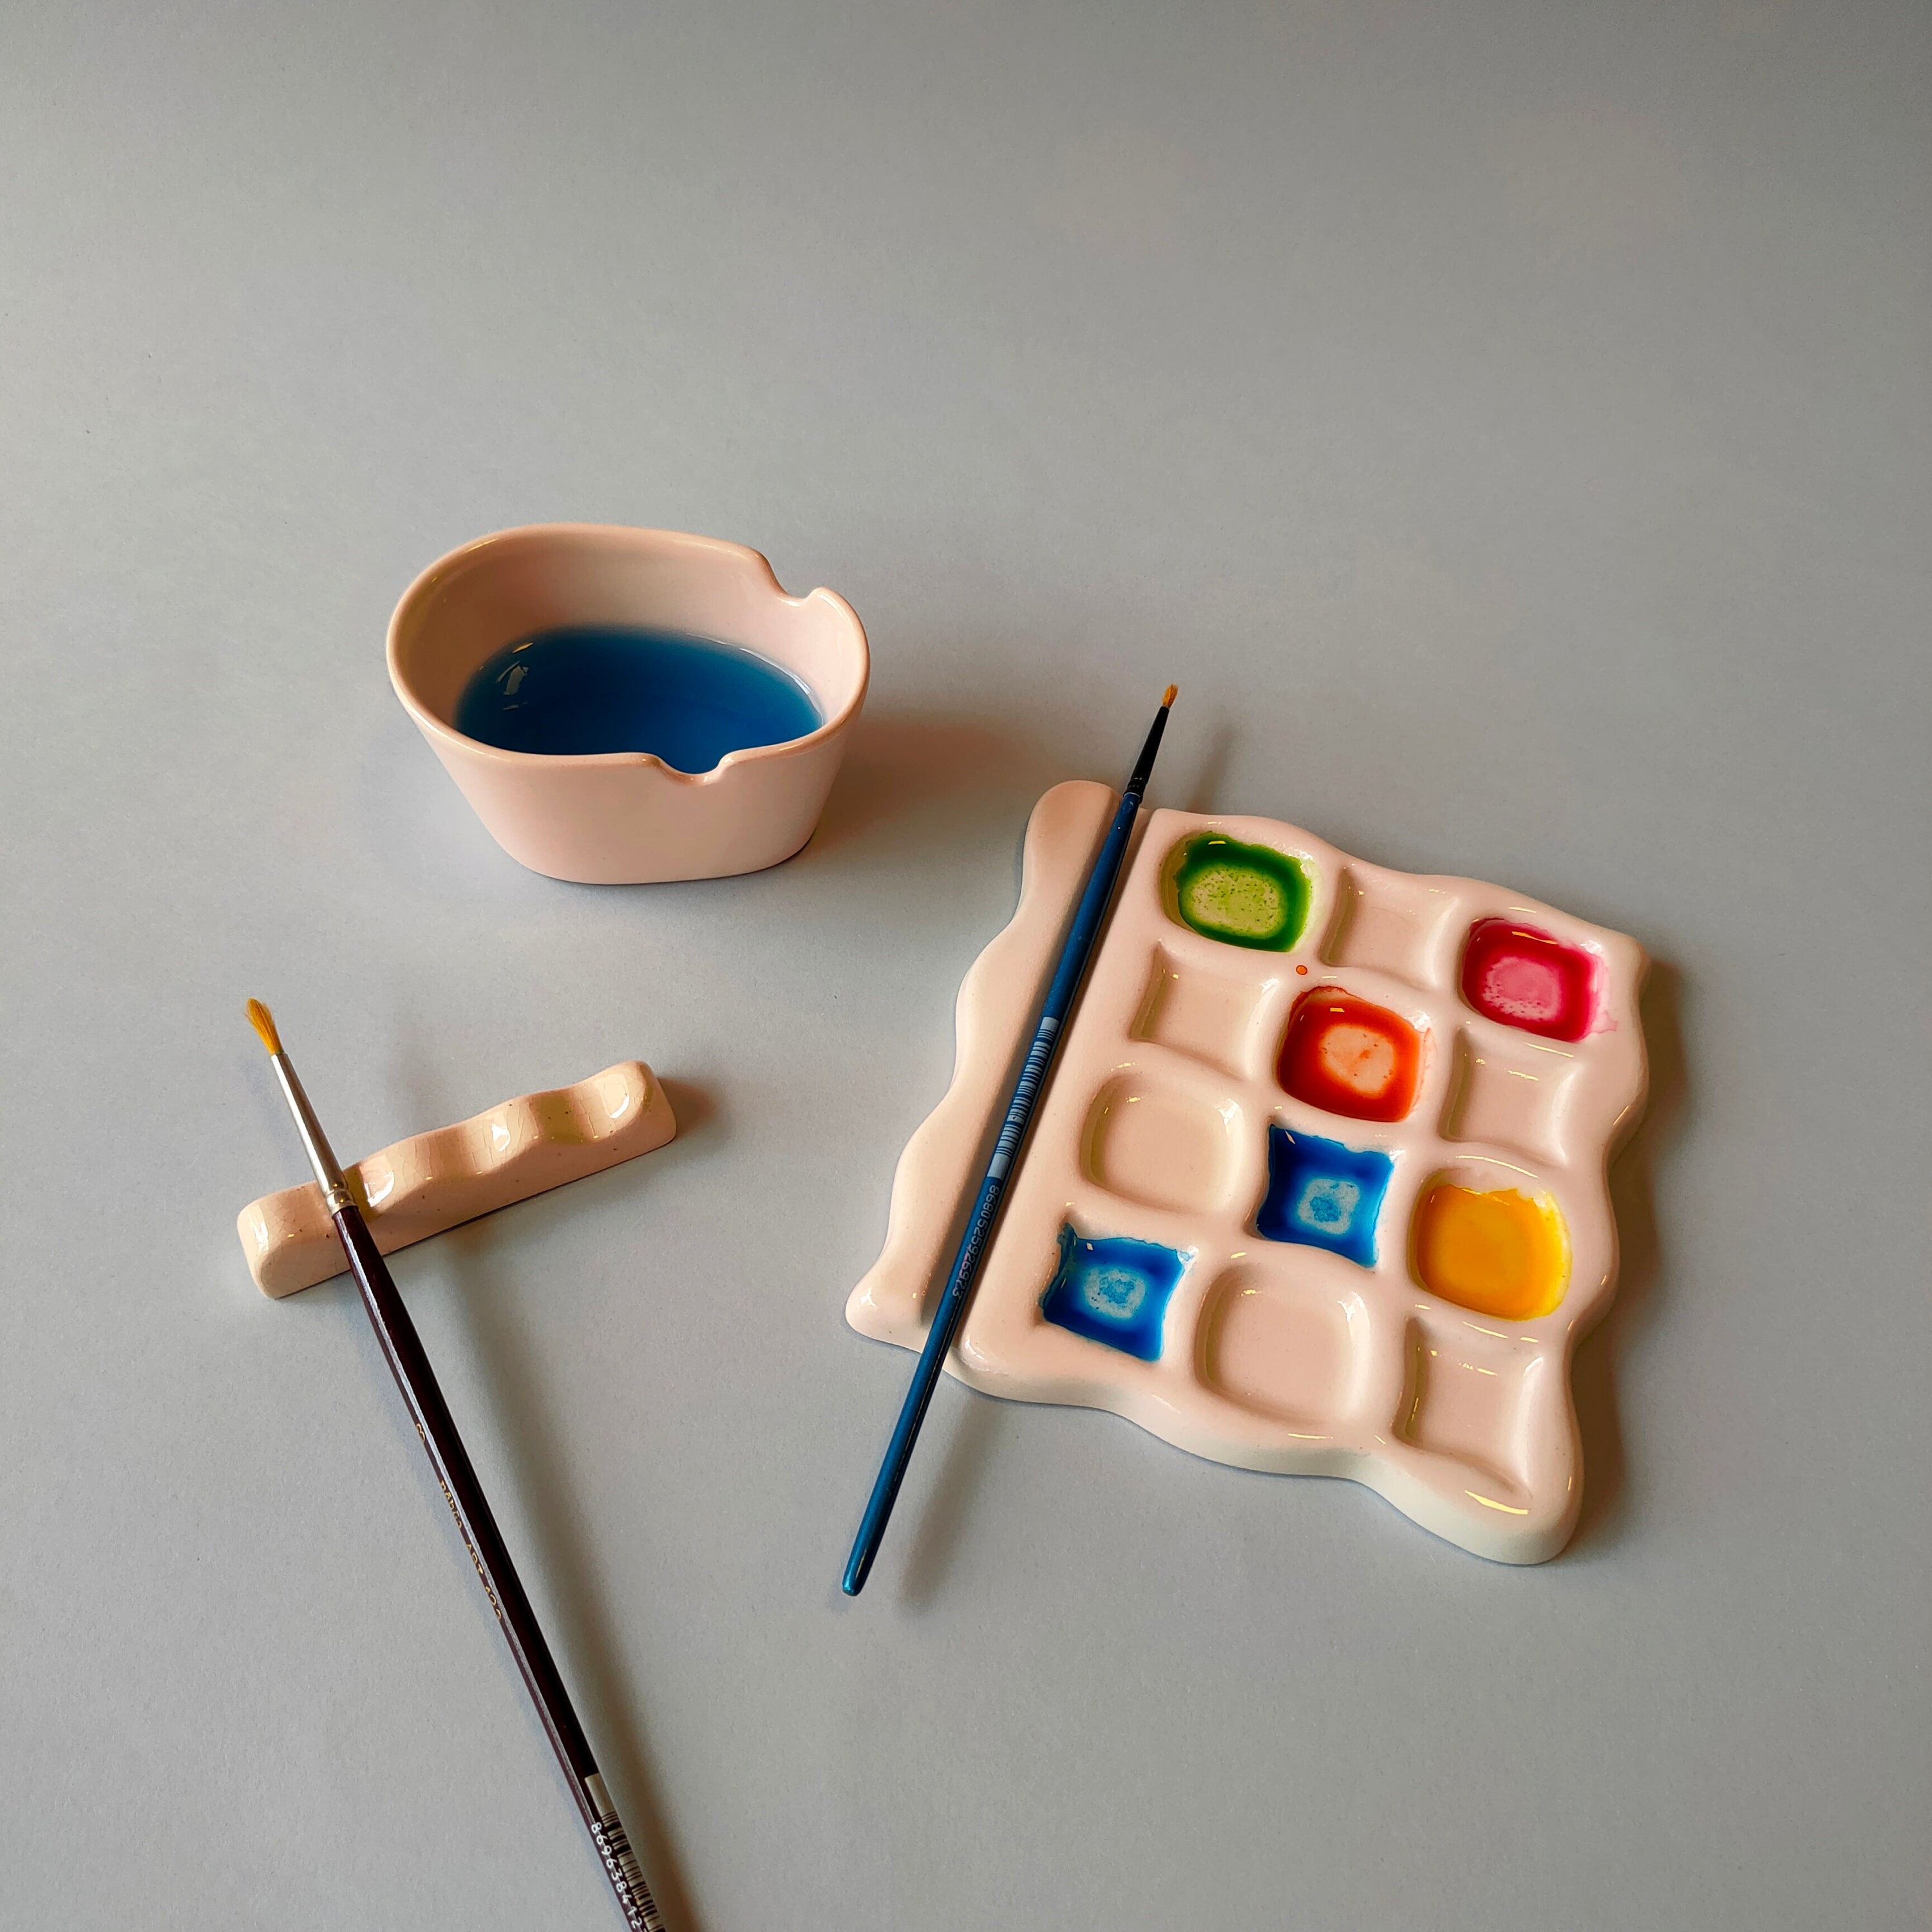 Set of painting tools: ceramic paint palette, water paint cup, brush rest.  Artist's tools, ceramic b rush holder